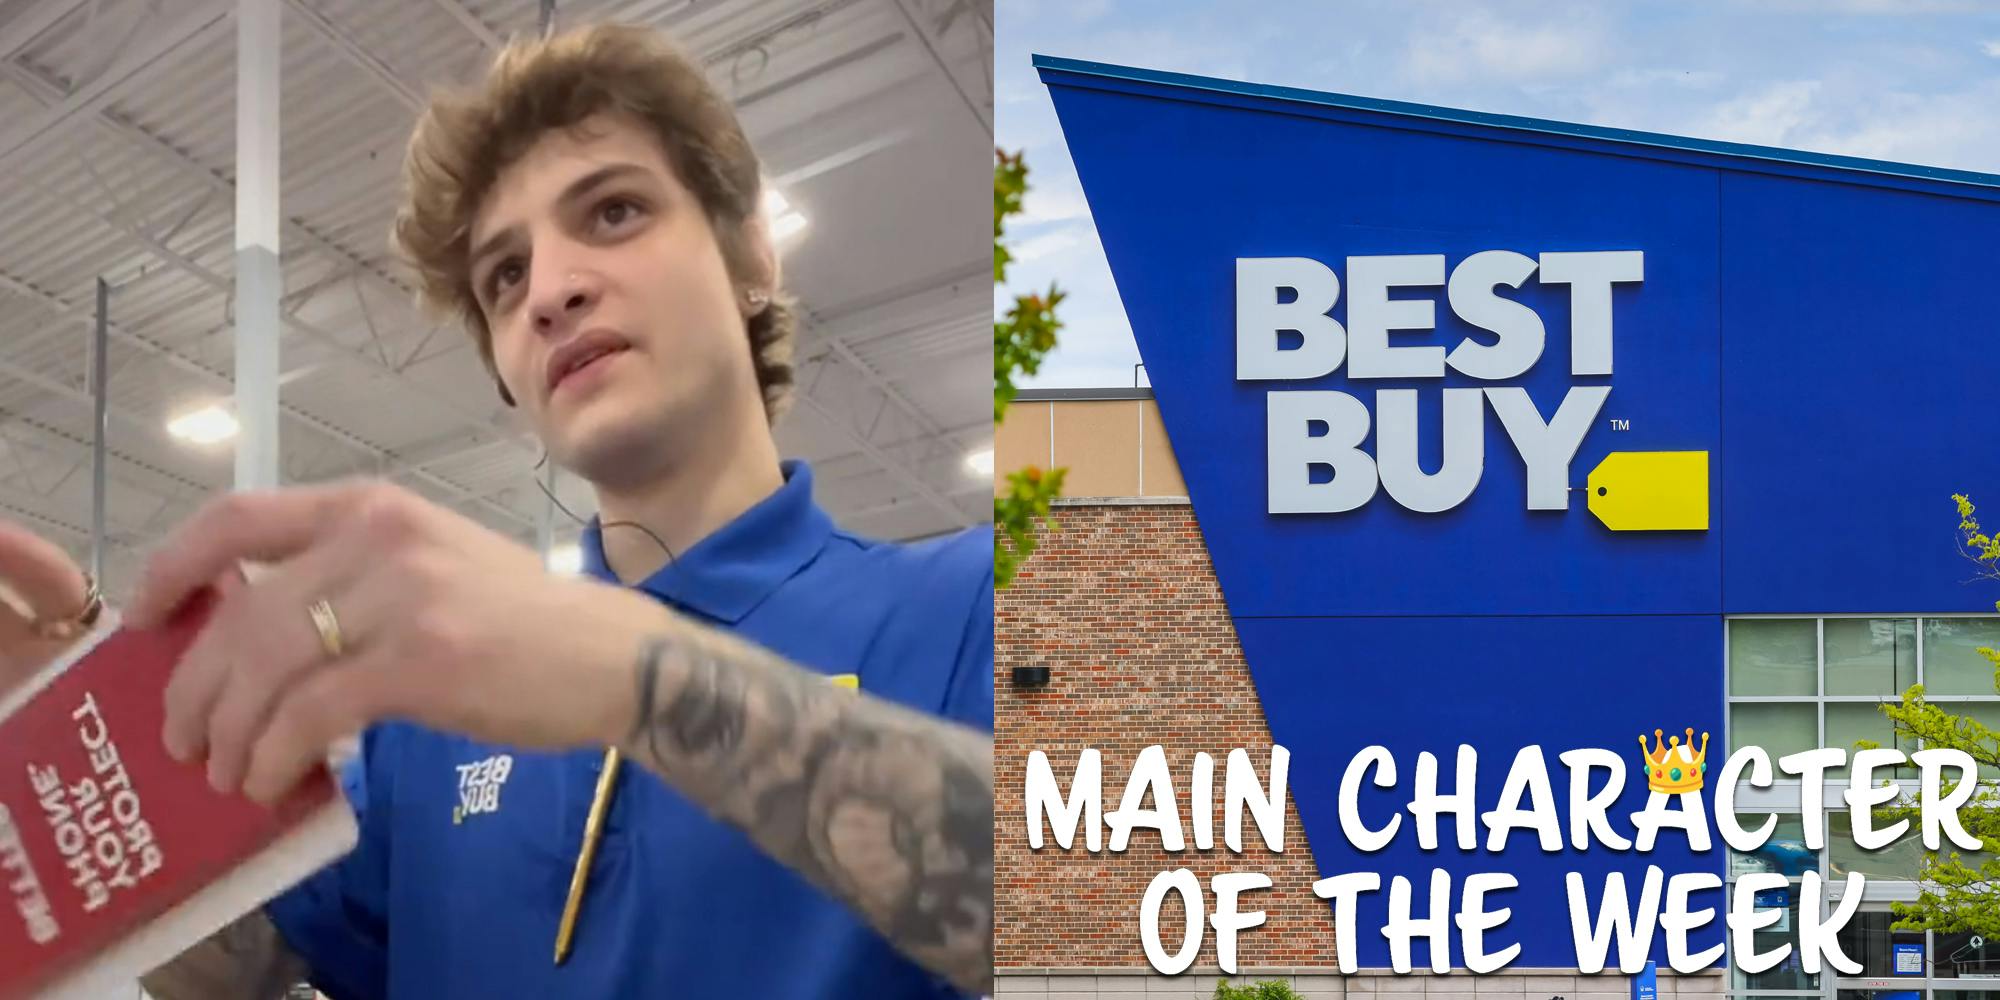 A Best Buy employee and a Best Buy store. There is text that says 'Main Character of the Week' in the bottom right corner.